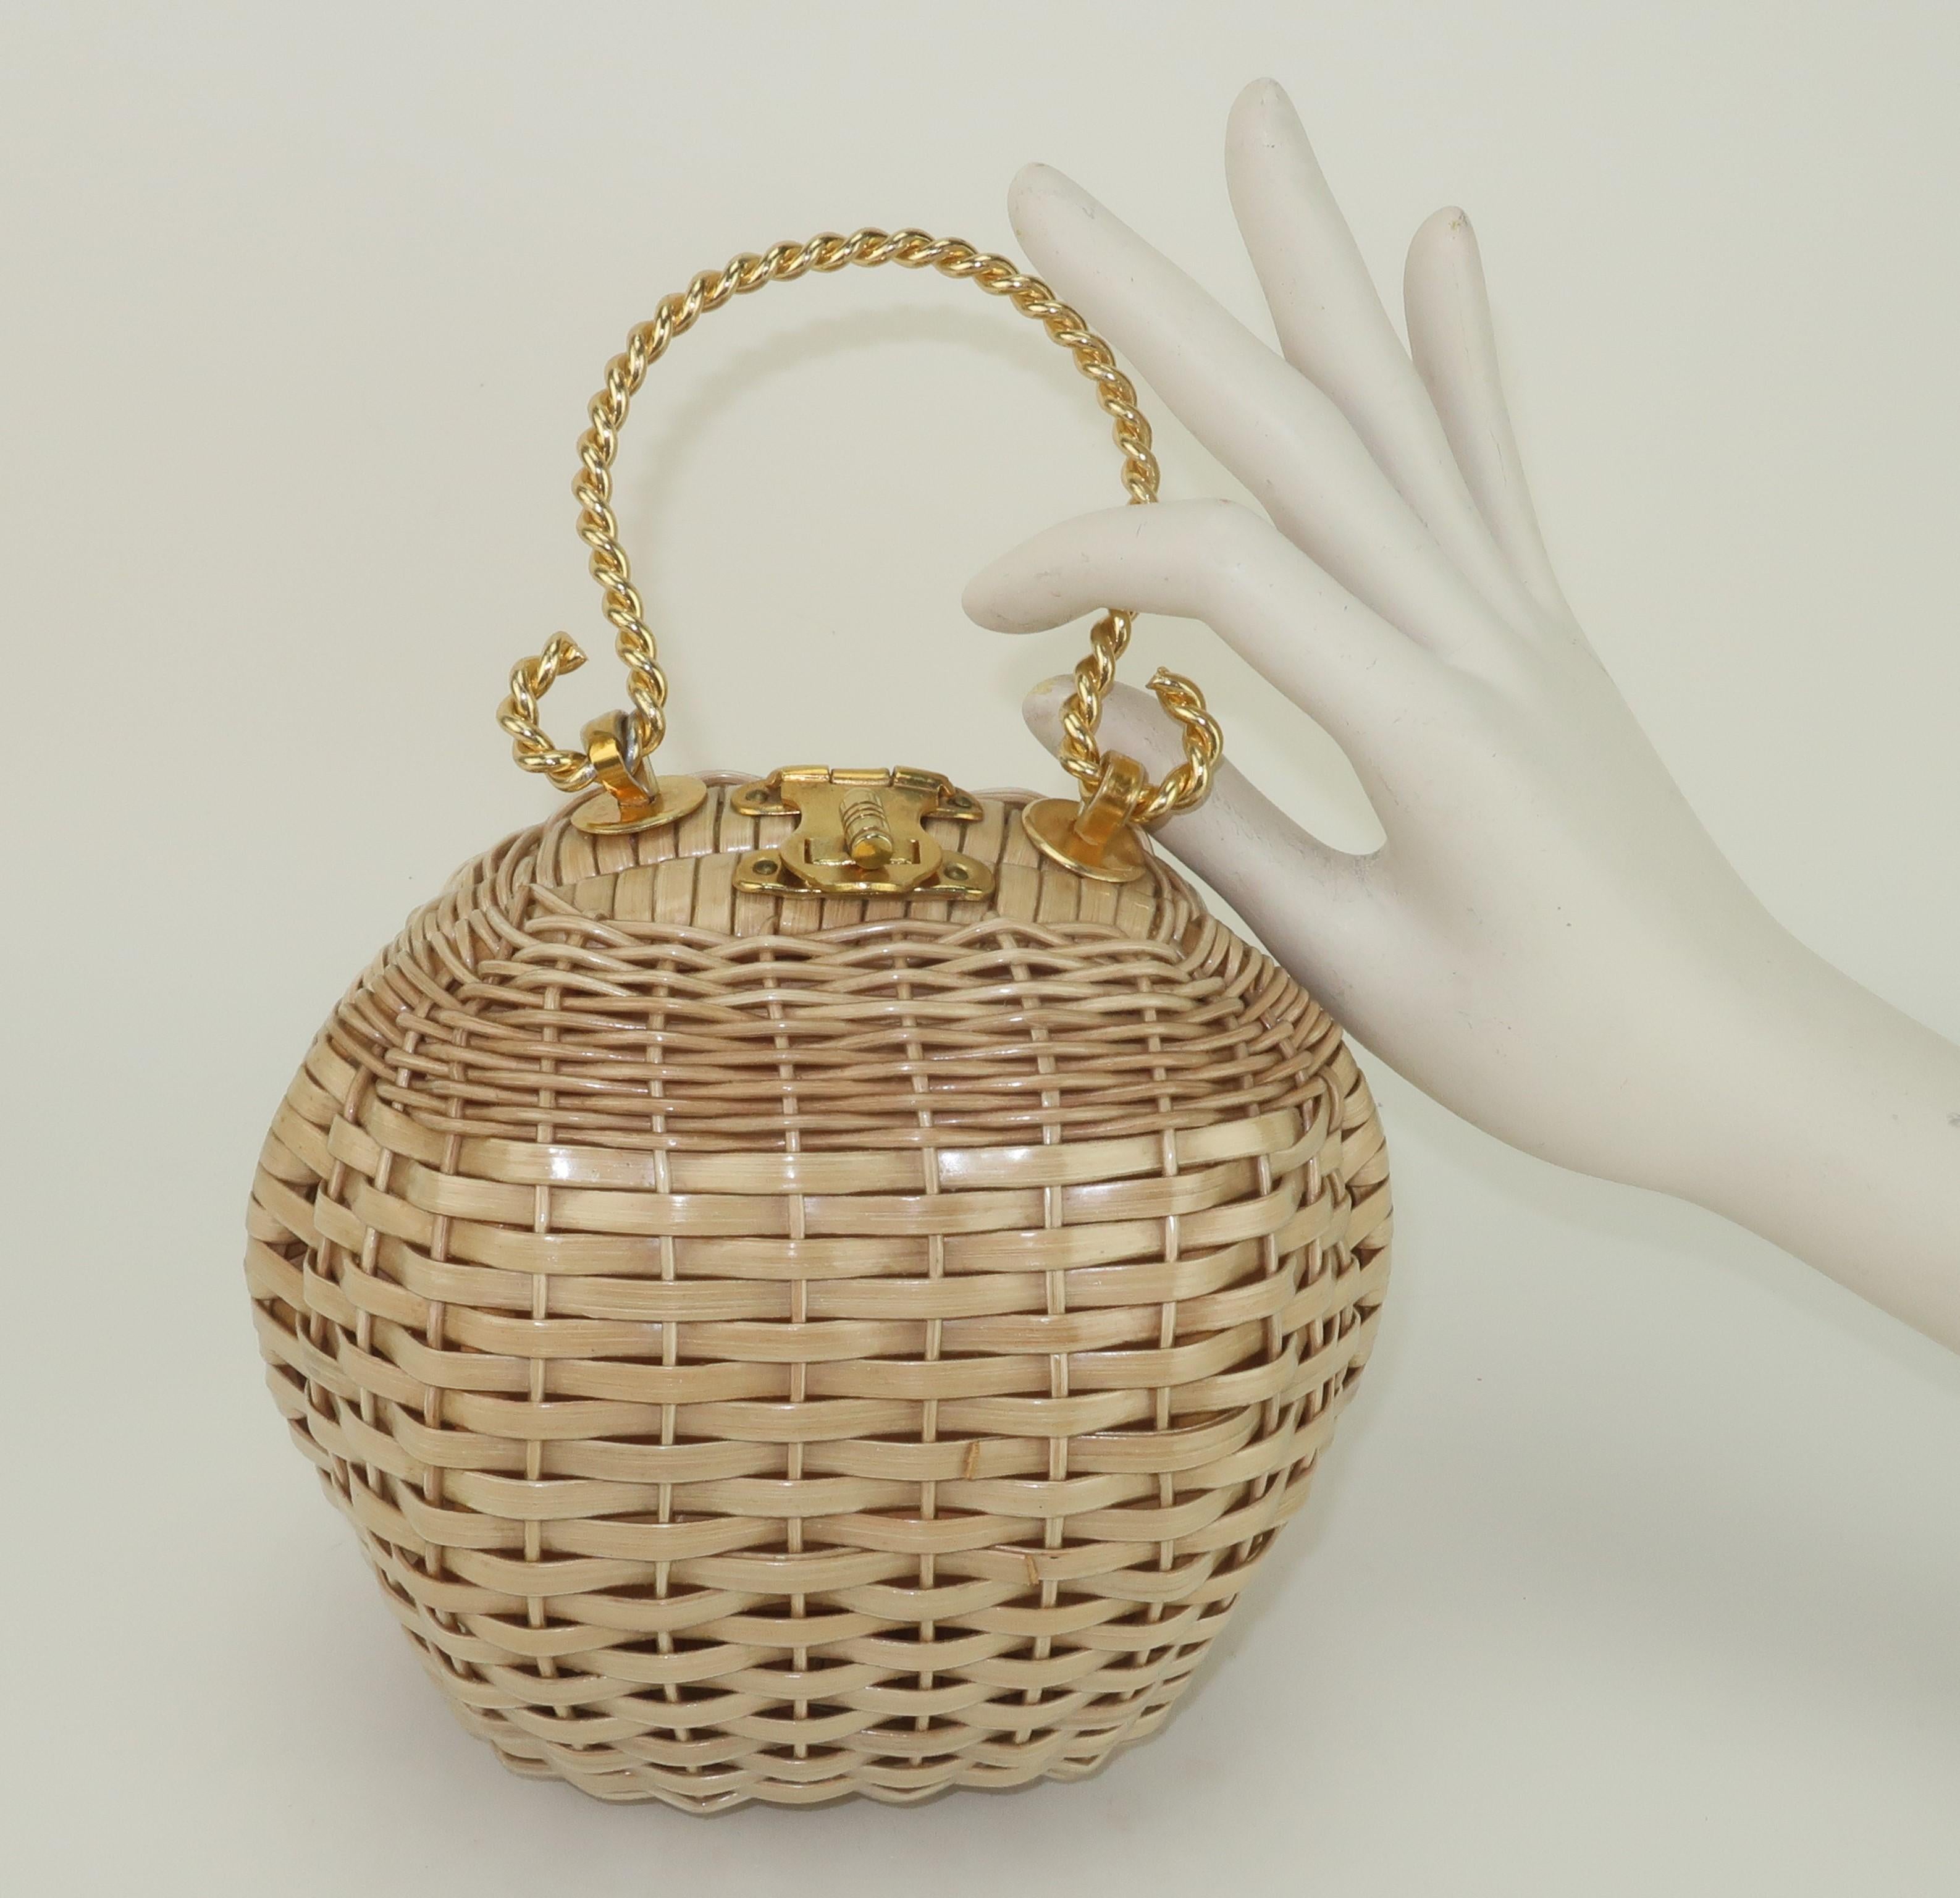 Wicker Ball Shaped Handbag With Gold Handle, 1960's For Sale 6